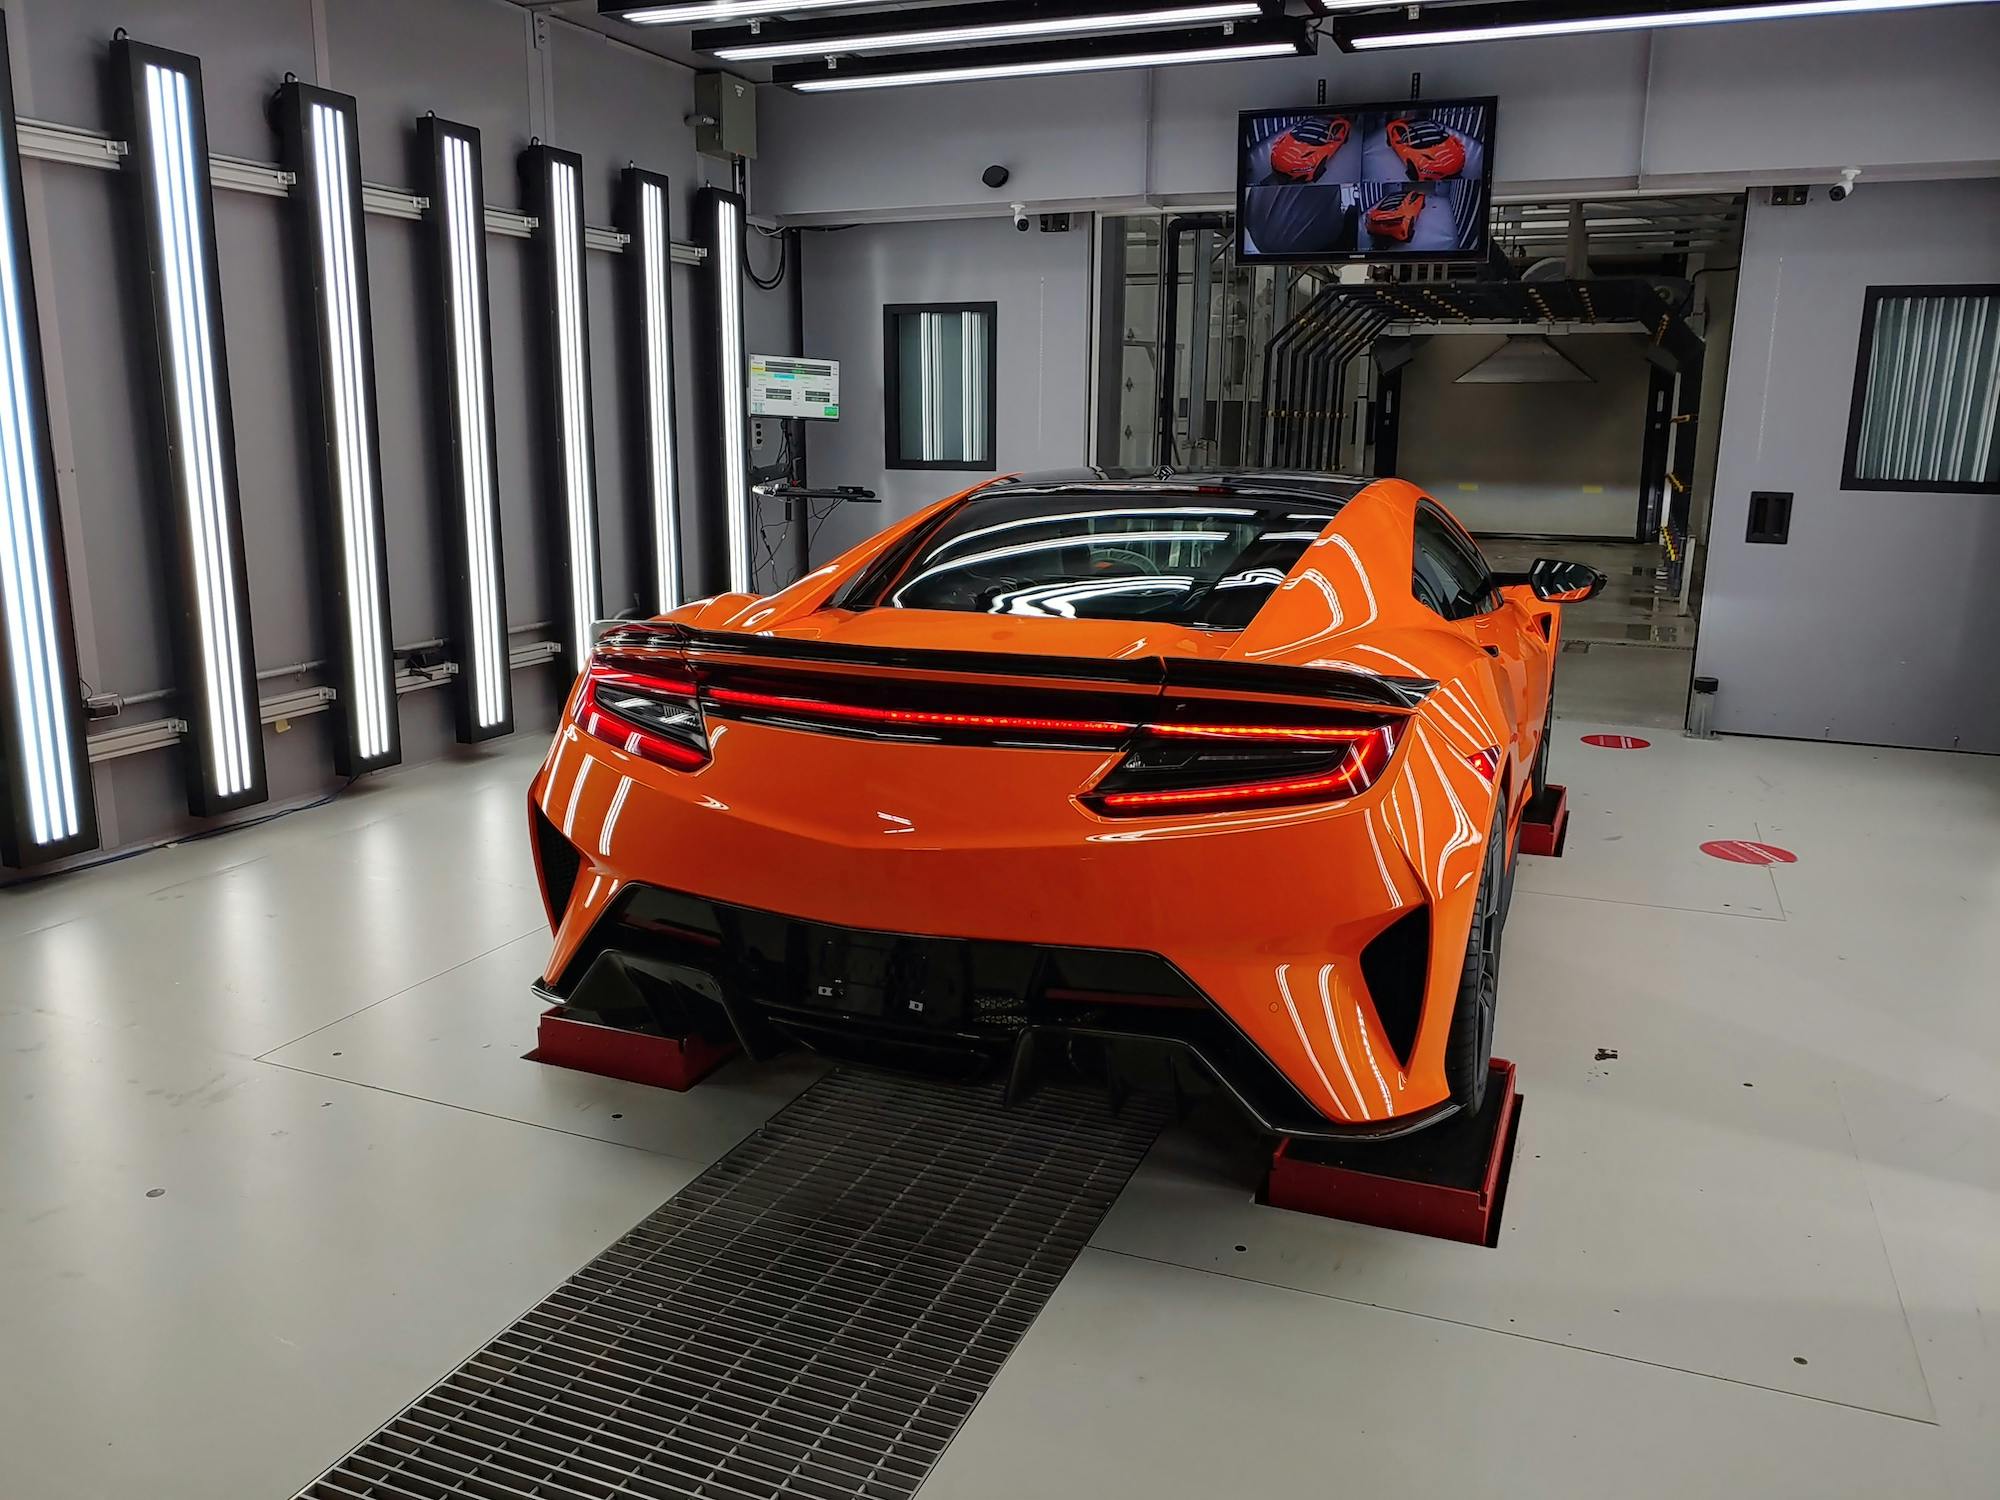 Acura NSX Performance Manufacturing Center